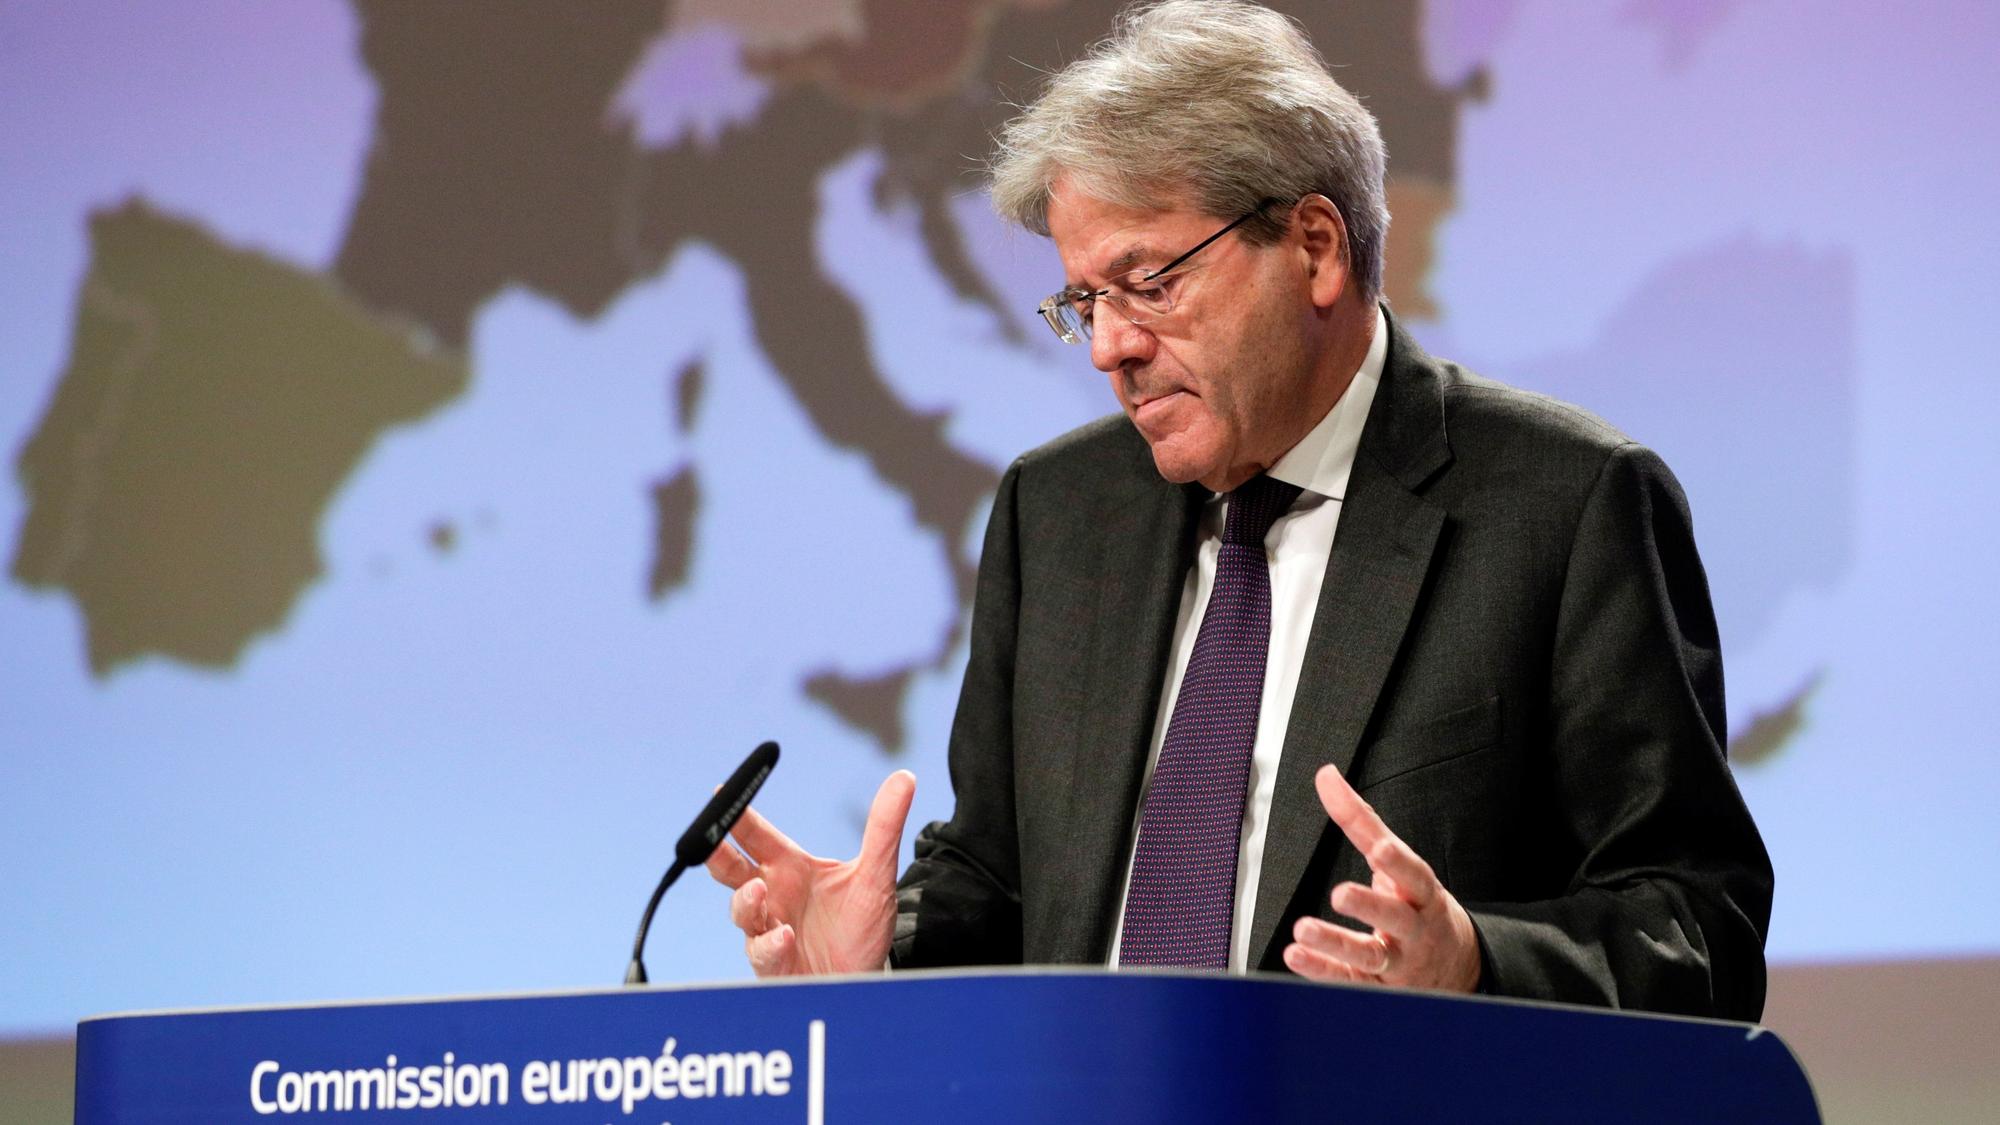 Brussels (Belgium), 11/11/2021.- European Commissioner in charge of Economy Paolo Gentiloni speaks at a press conference to present autumn 2021 economic forecast of the European Commission in Brussels, Belgium, 11 November 2021. (Bélgica, Bruselas) EFE/EPA/OLIVIER HOSLET